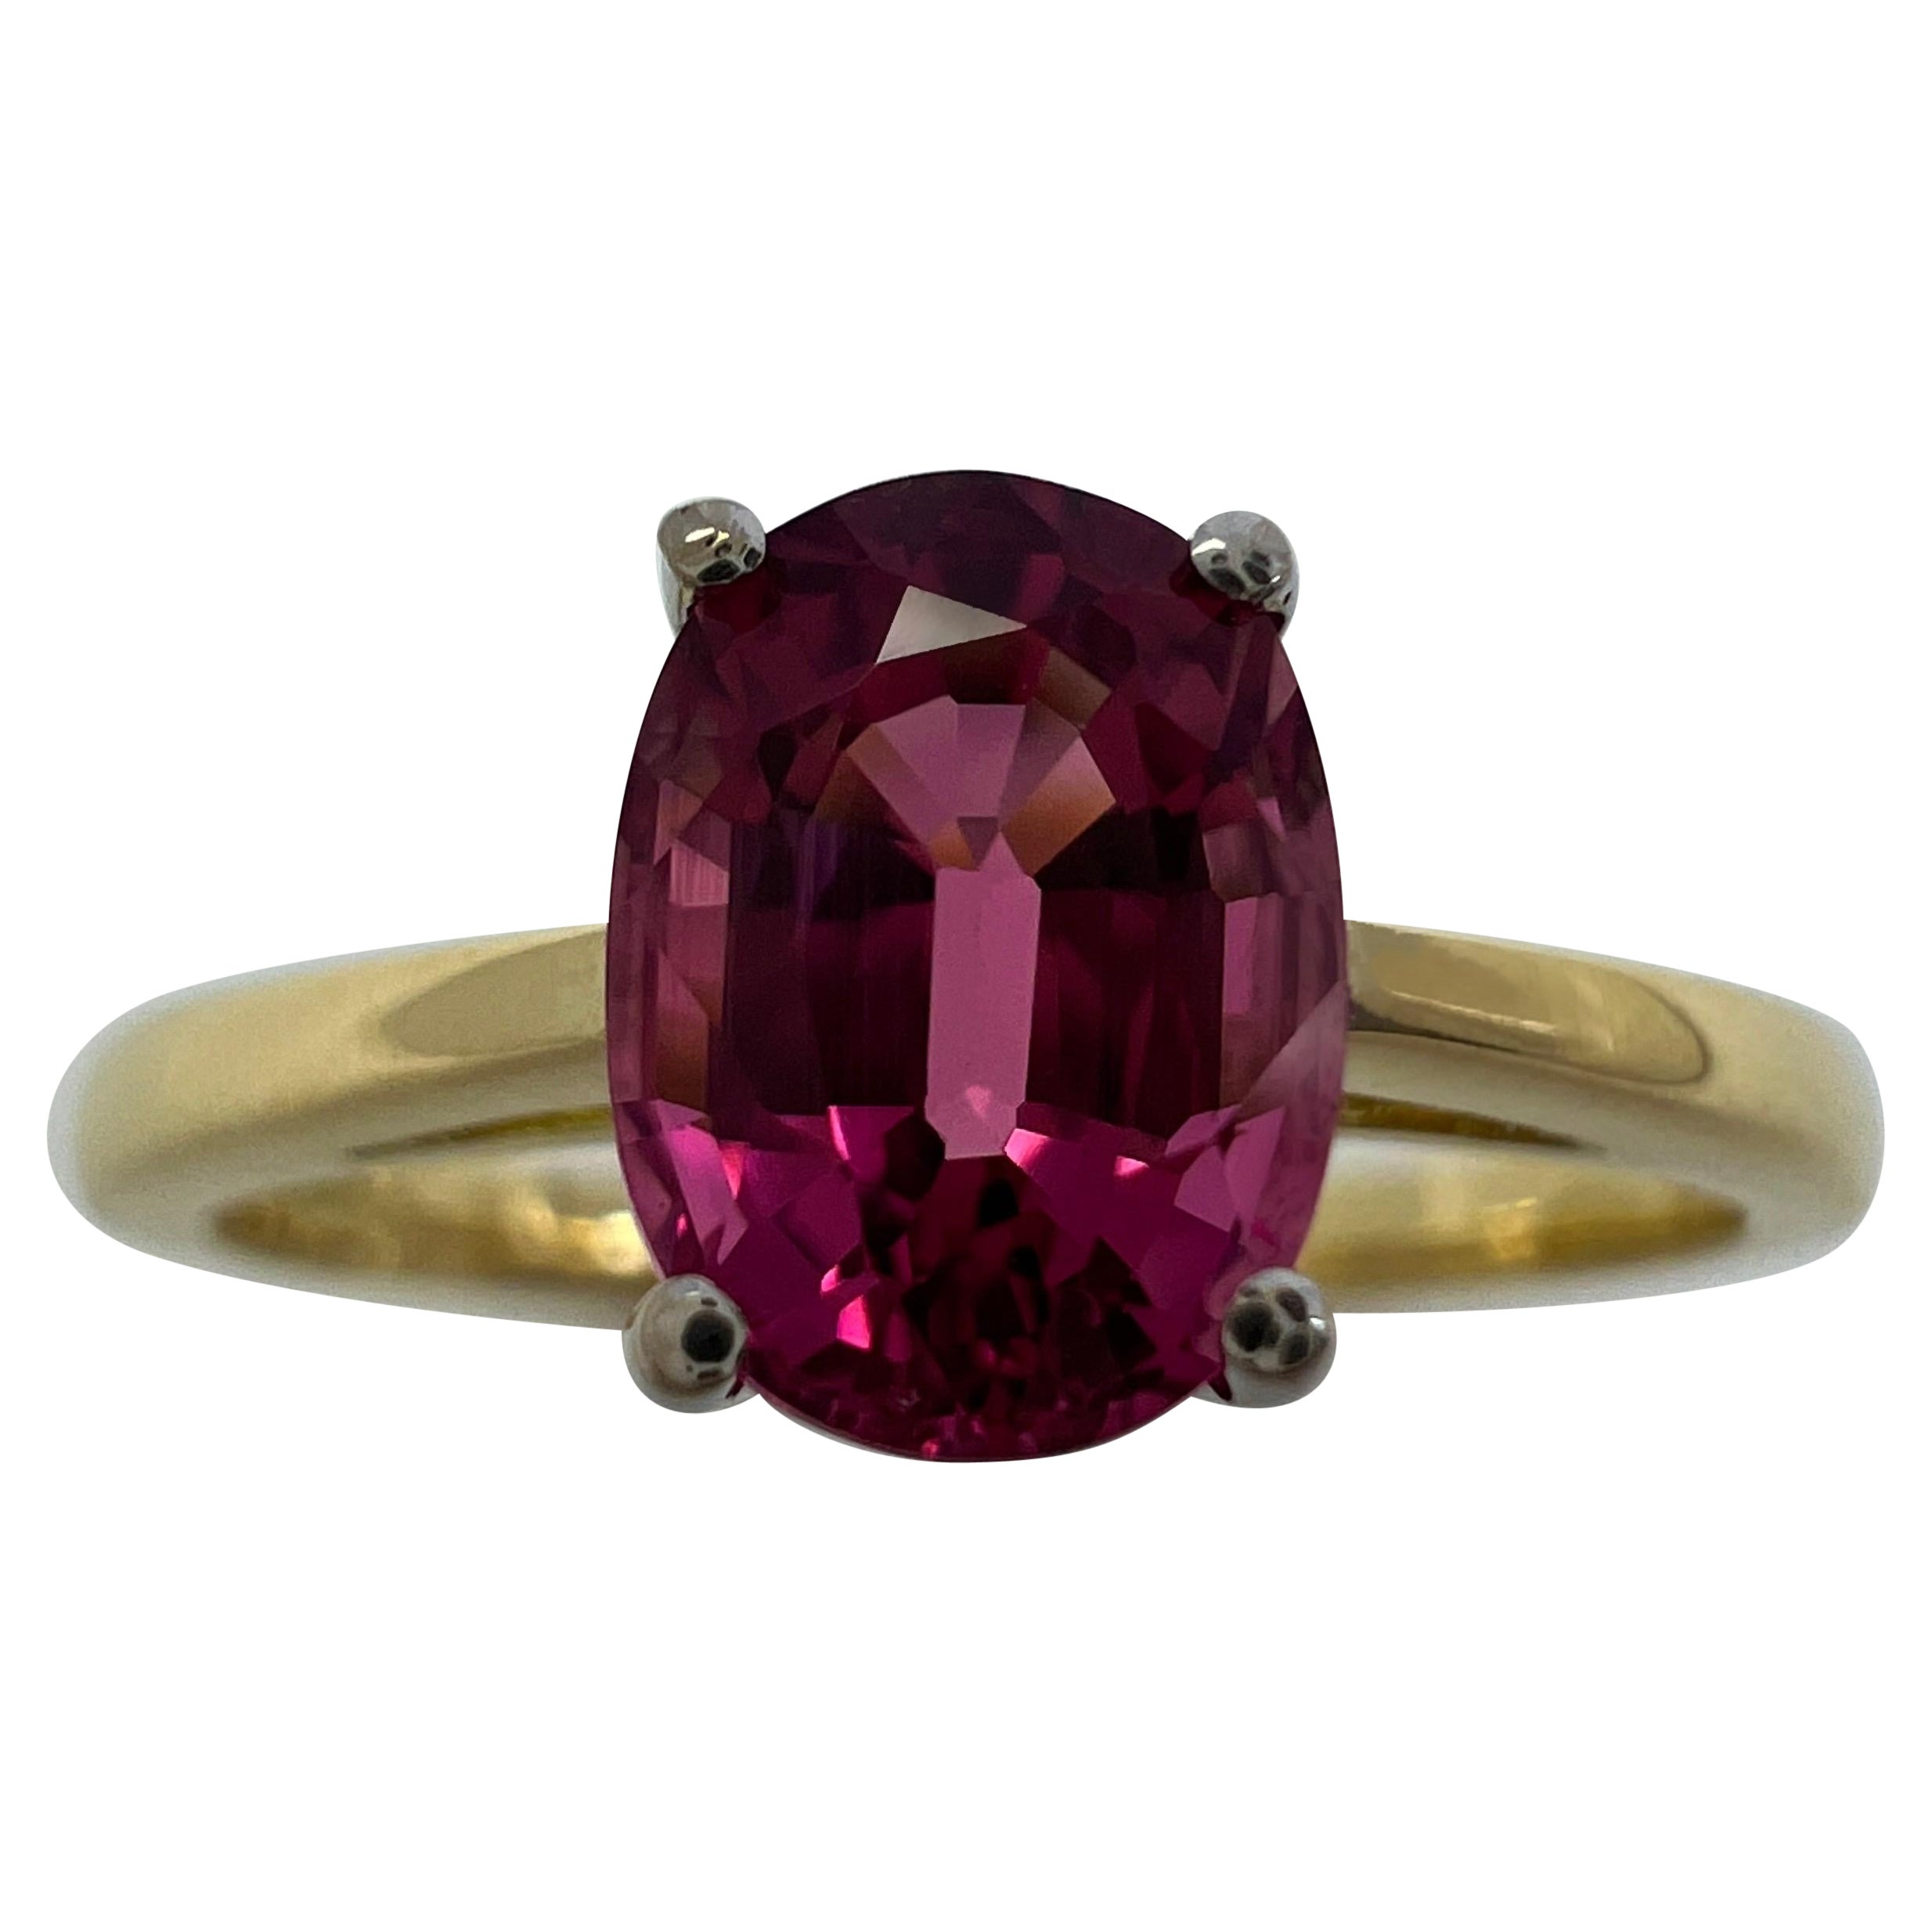 1.10ct Vivid Pink Purple Rubellite Tourmaline Oval Cut 18k Gold Solitaire Ring For Sale